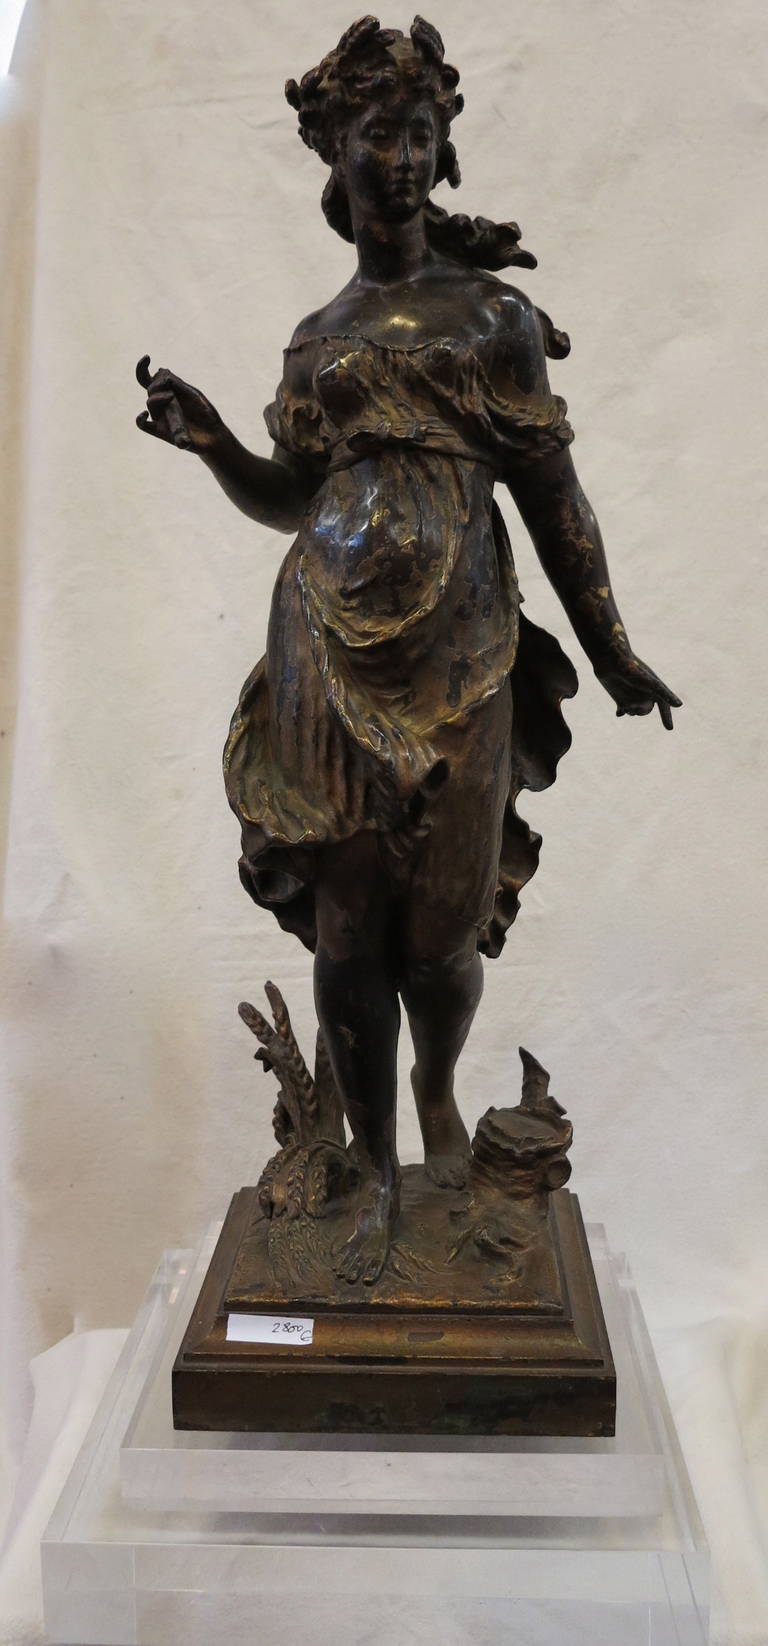 Statue with patina damaged by time, dual signature Moreau, Raingo, circa 1890, in good condition despite a lack in hand.